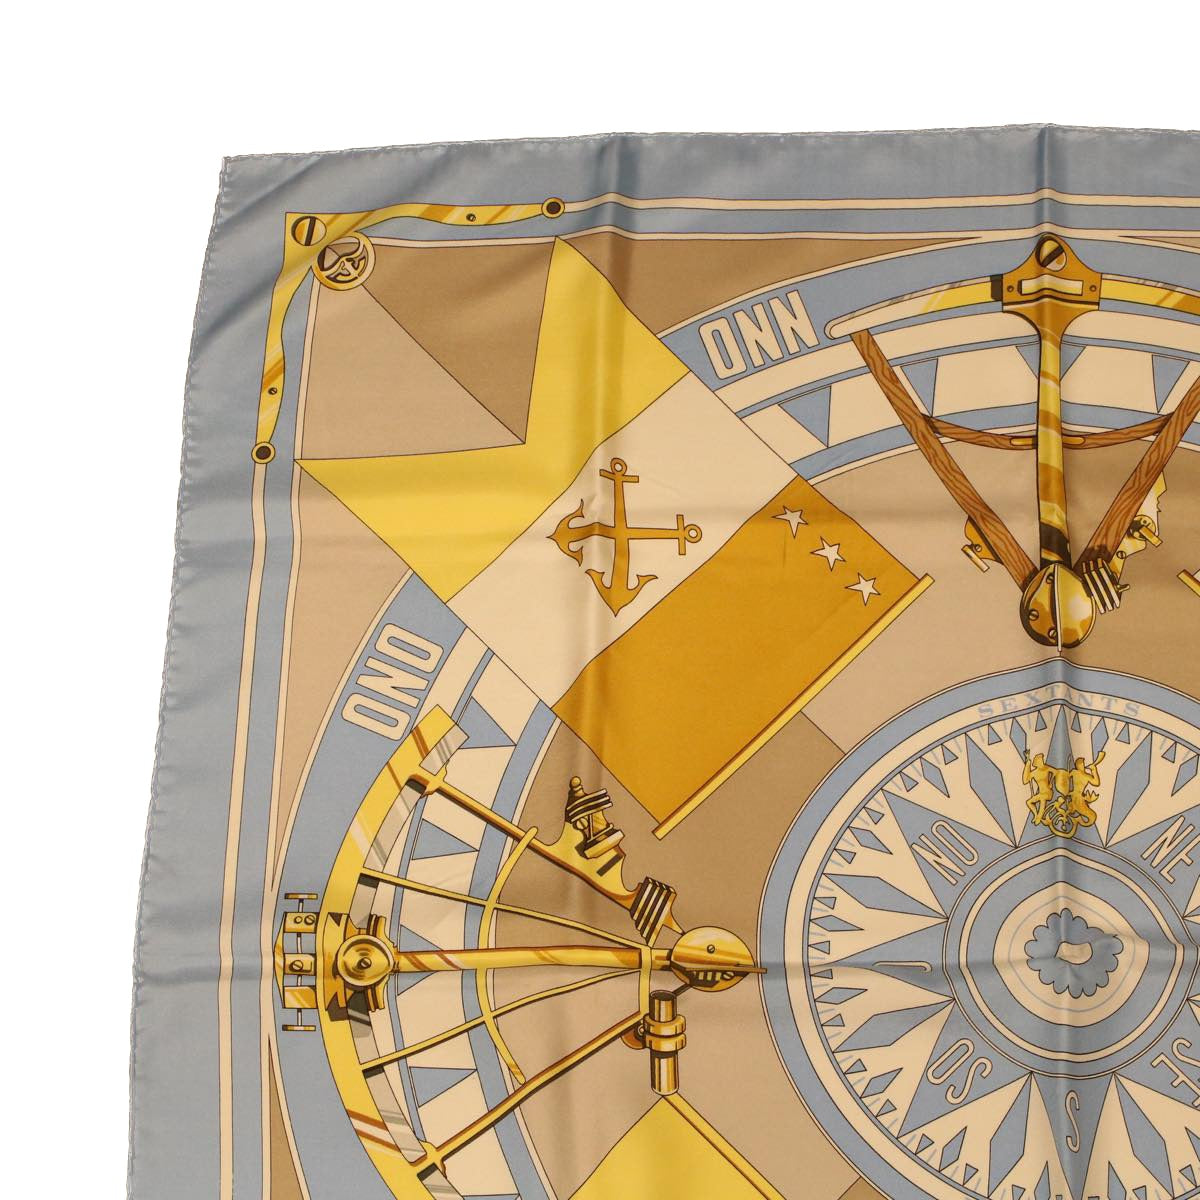 HERMES Carre 90 SEXTANTS Scarf Silk Light Blue Yellow Auth 42700